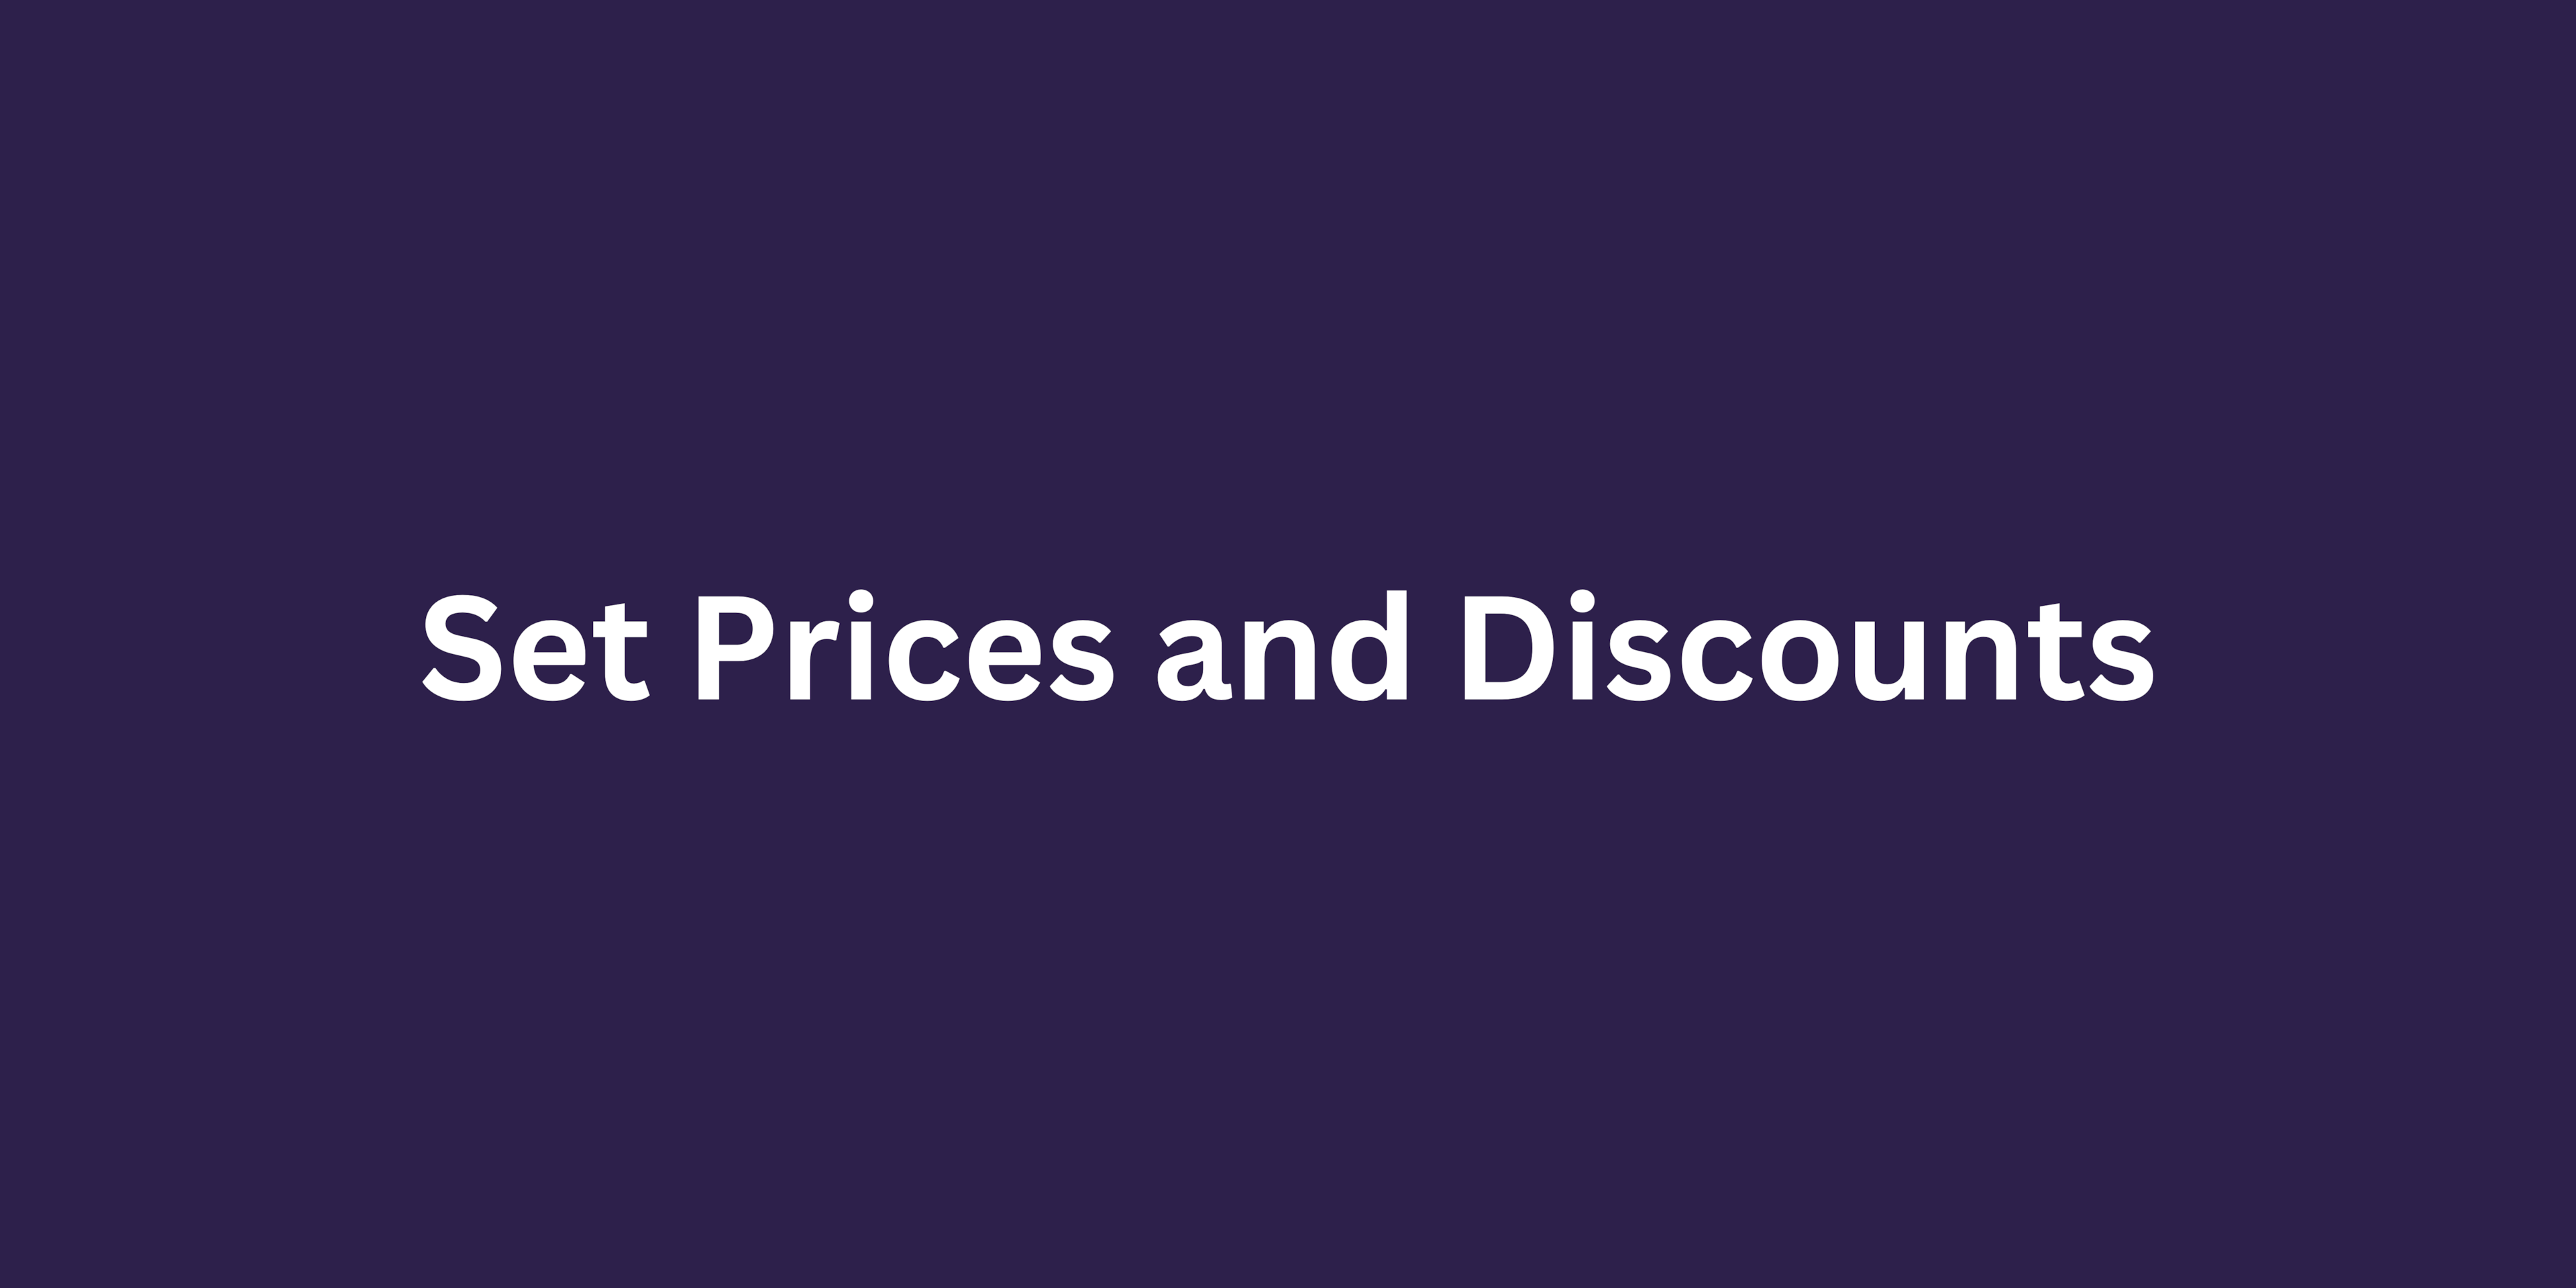 Set Prices and Discounts